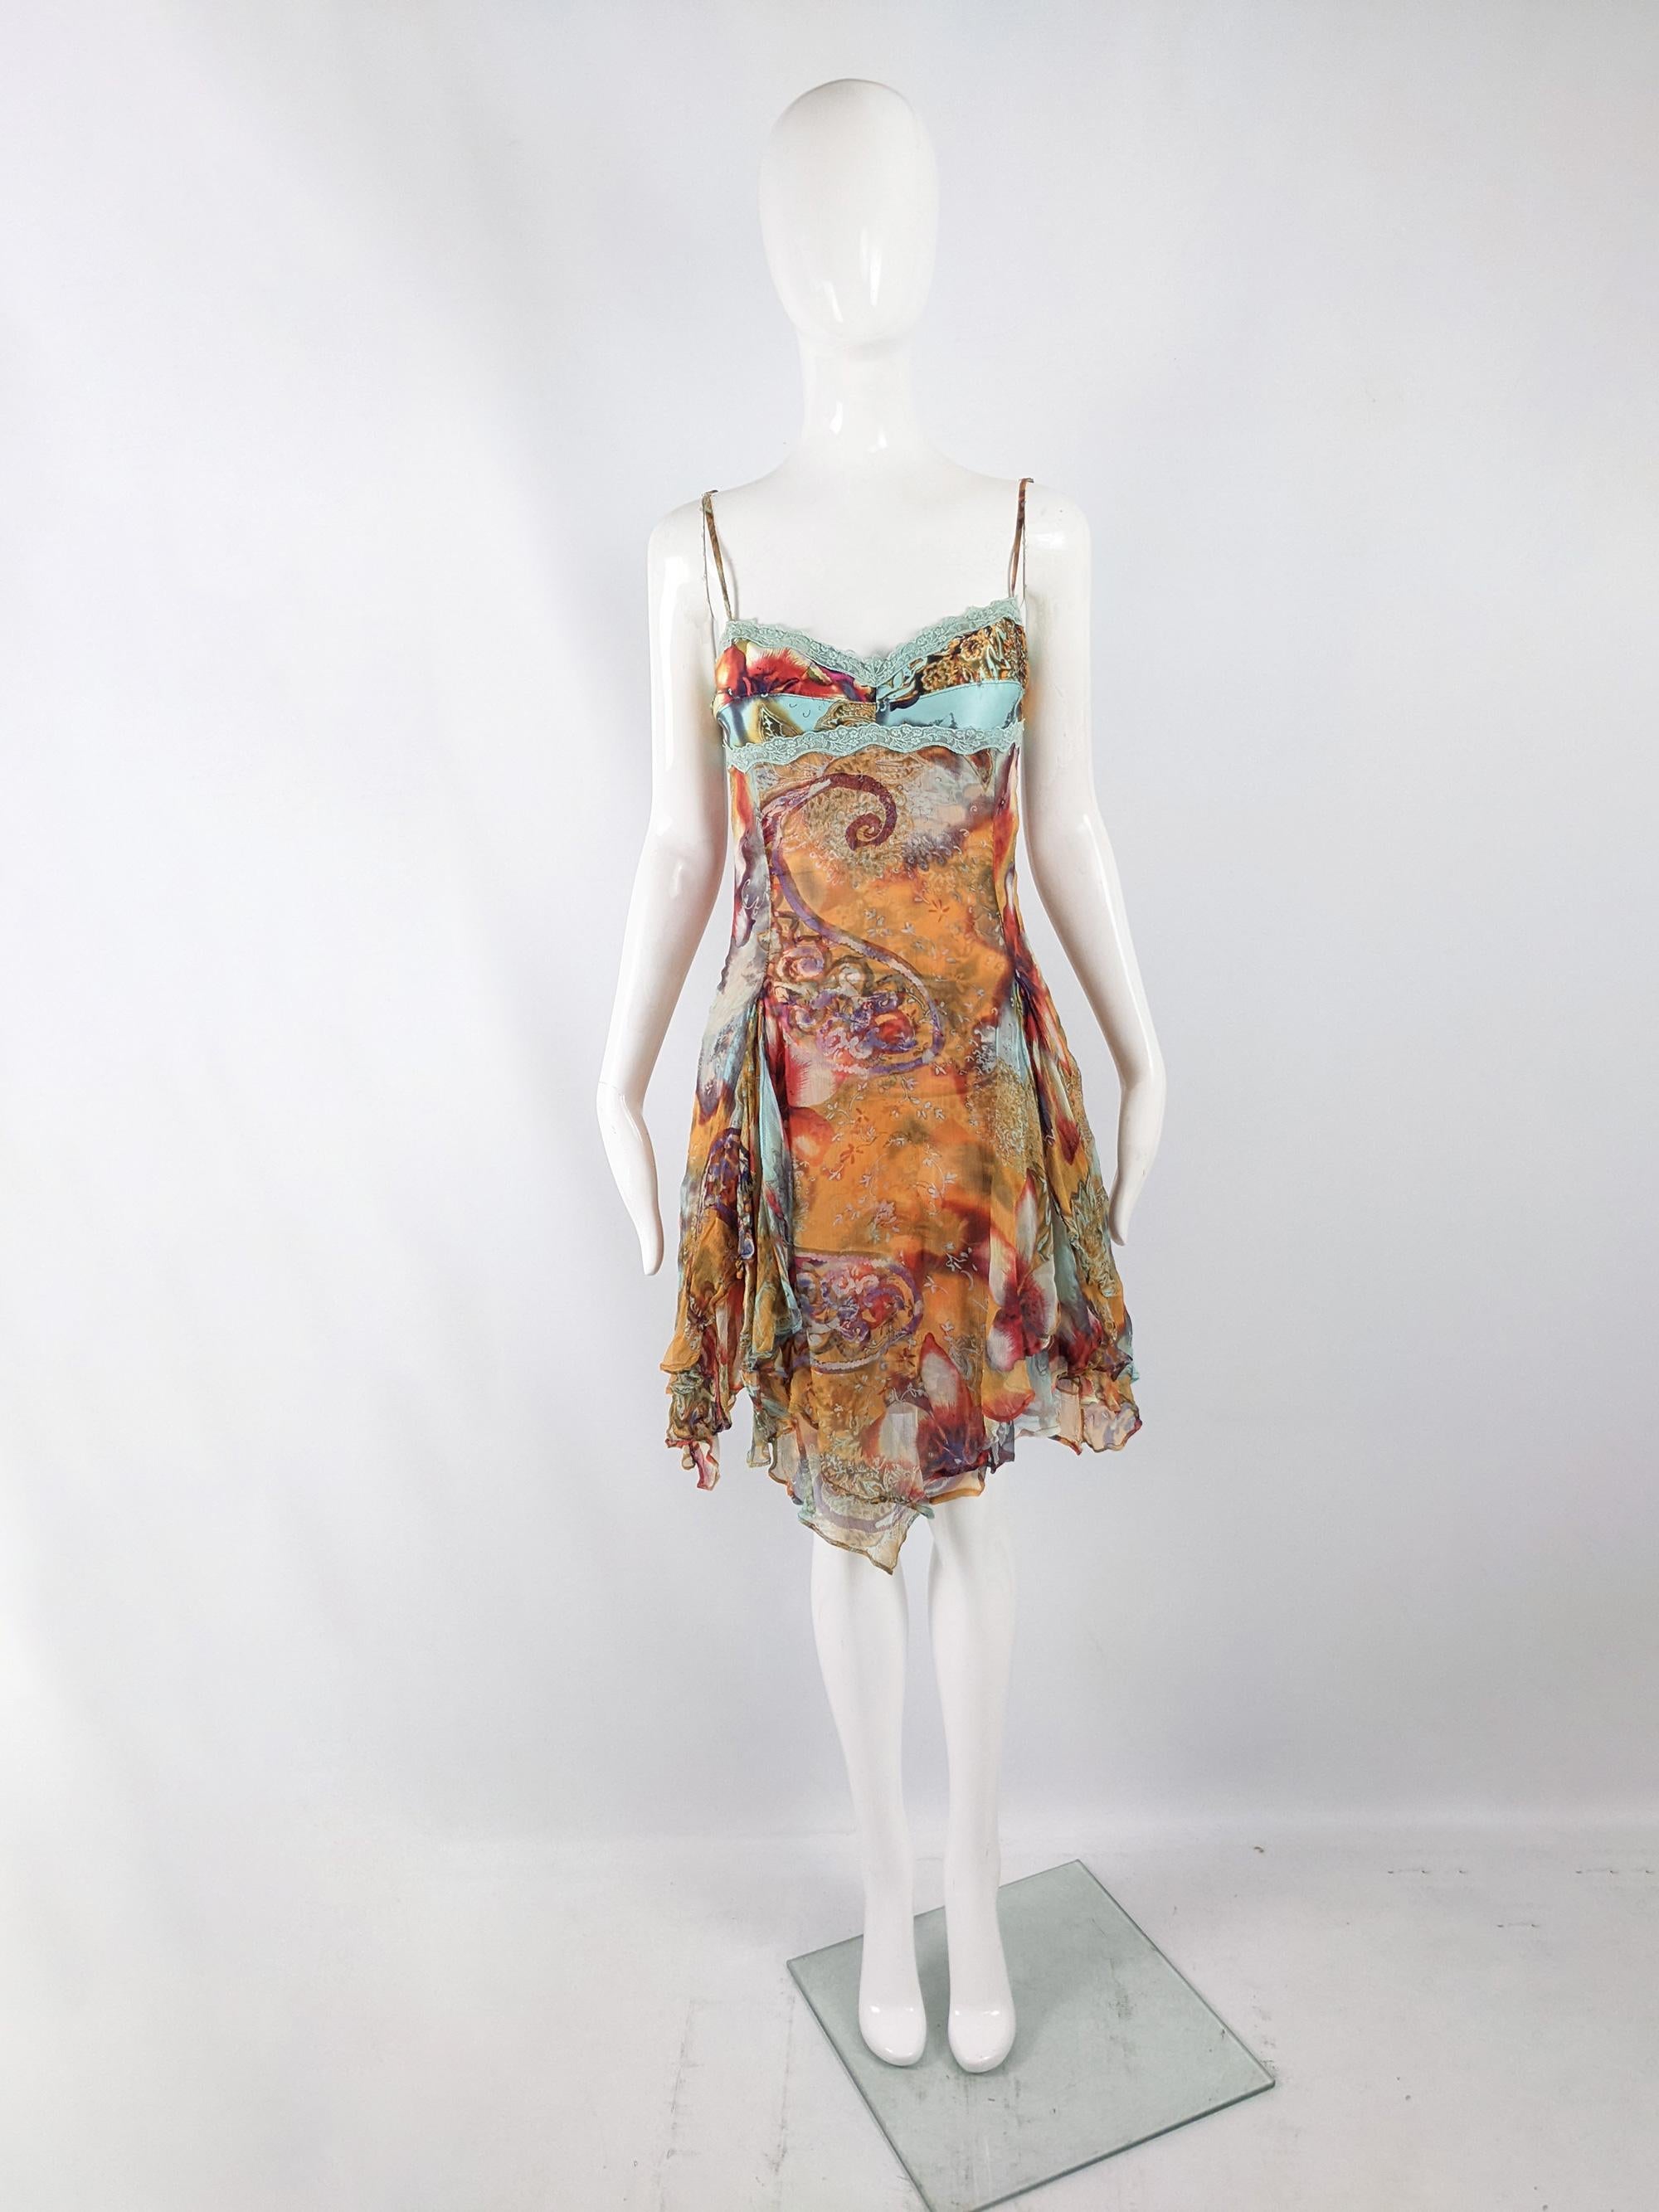 A sexy vintage womens dress from the late 90s / early 2000s by luxury Parisian fashion designer, Orna Farho. In an orange pure silk chiffon fabric, which has beautiful drape and airiness, printed with an abstract paisley and floral print. It is